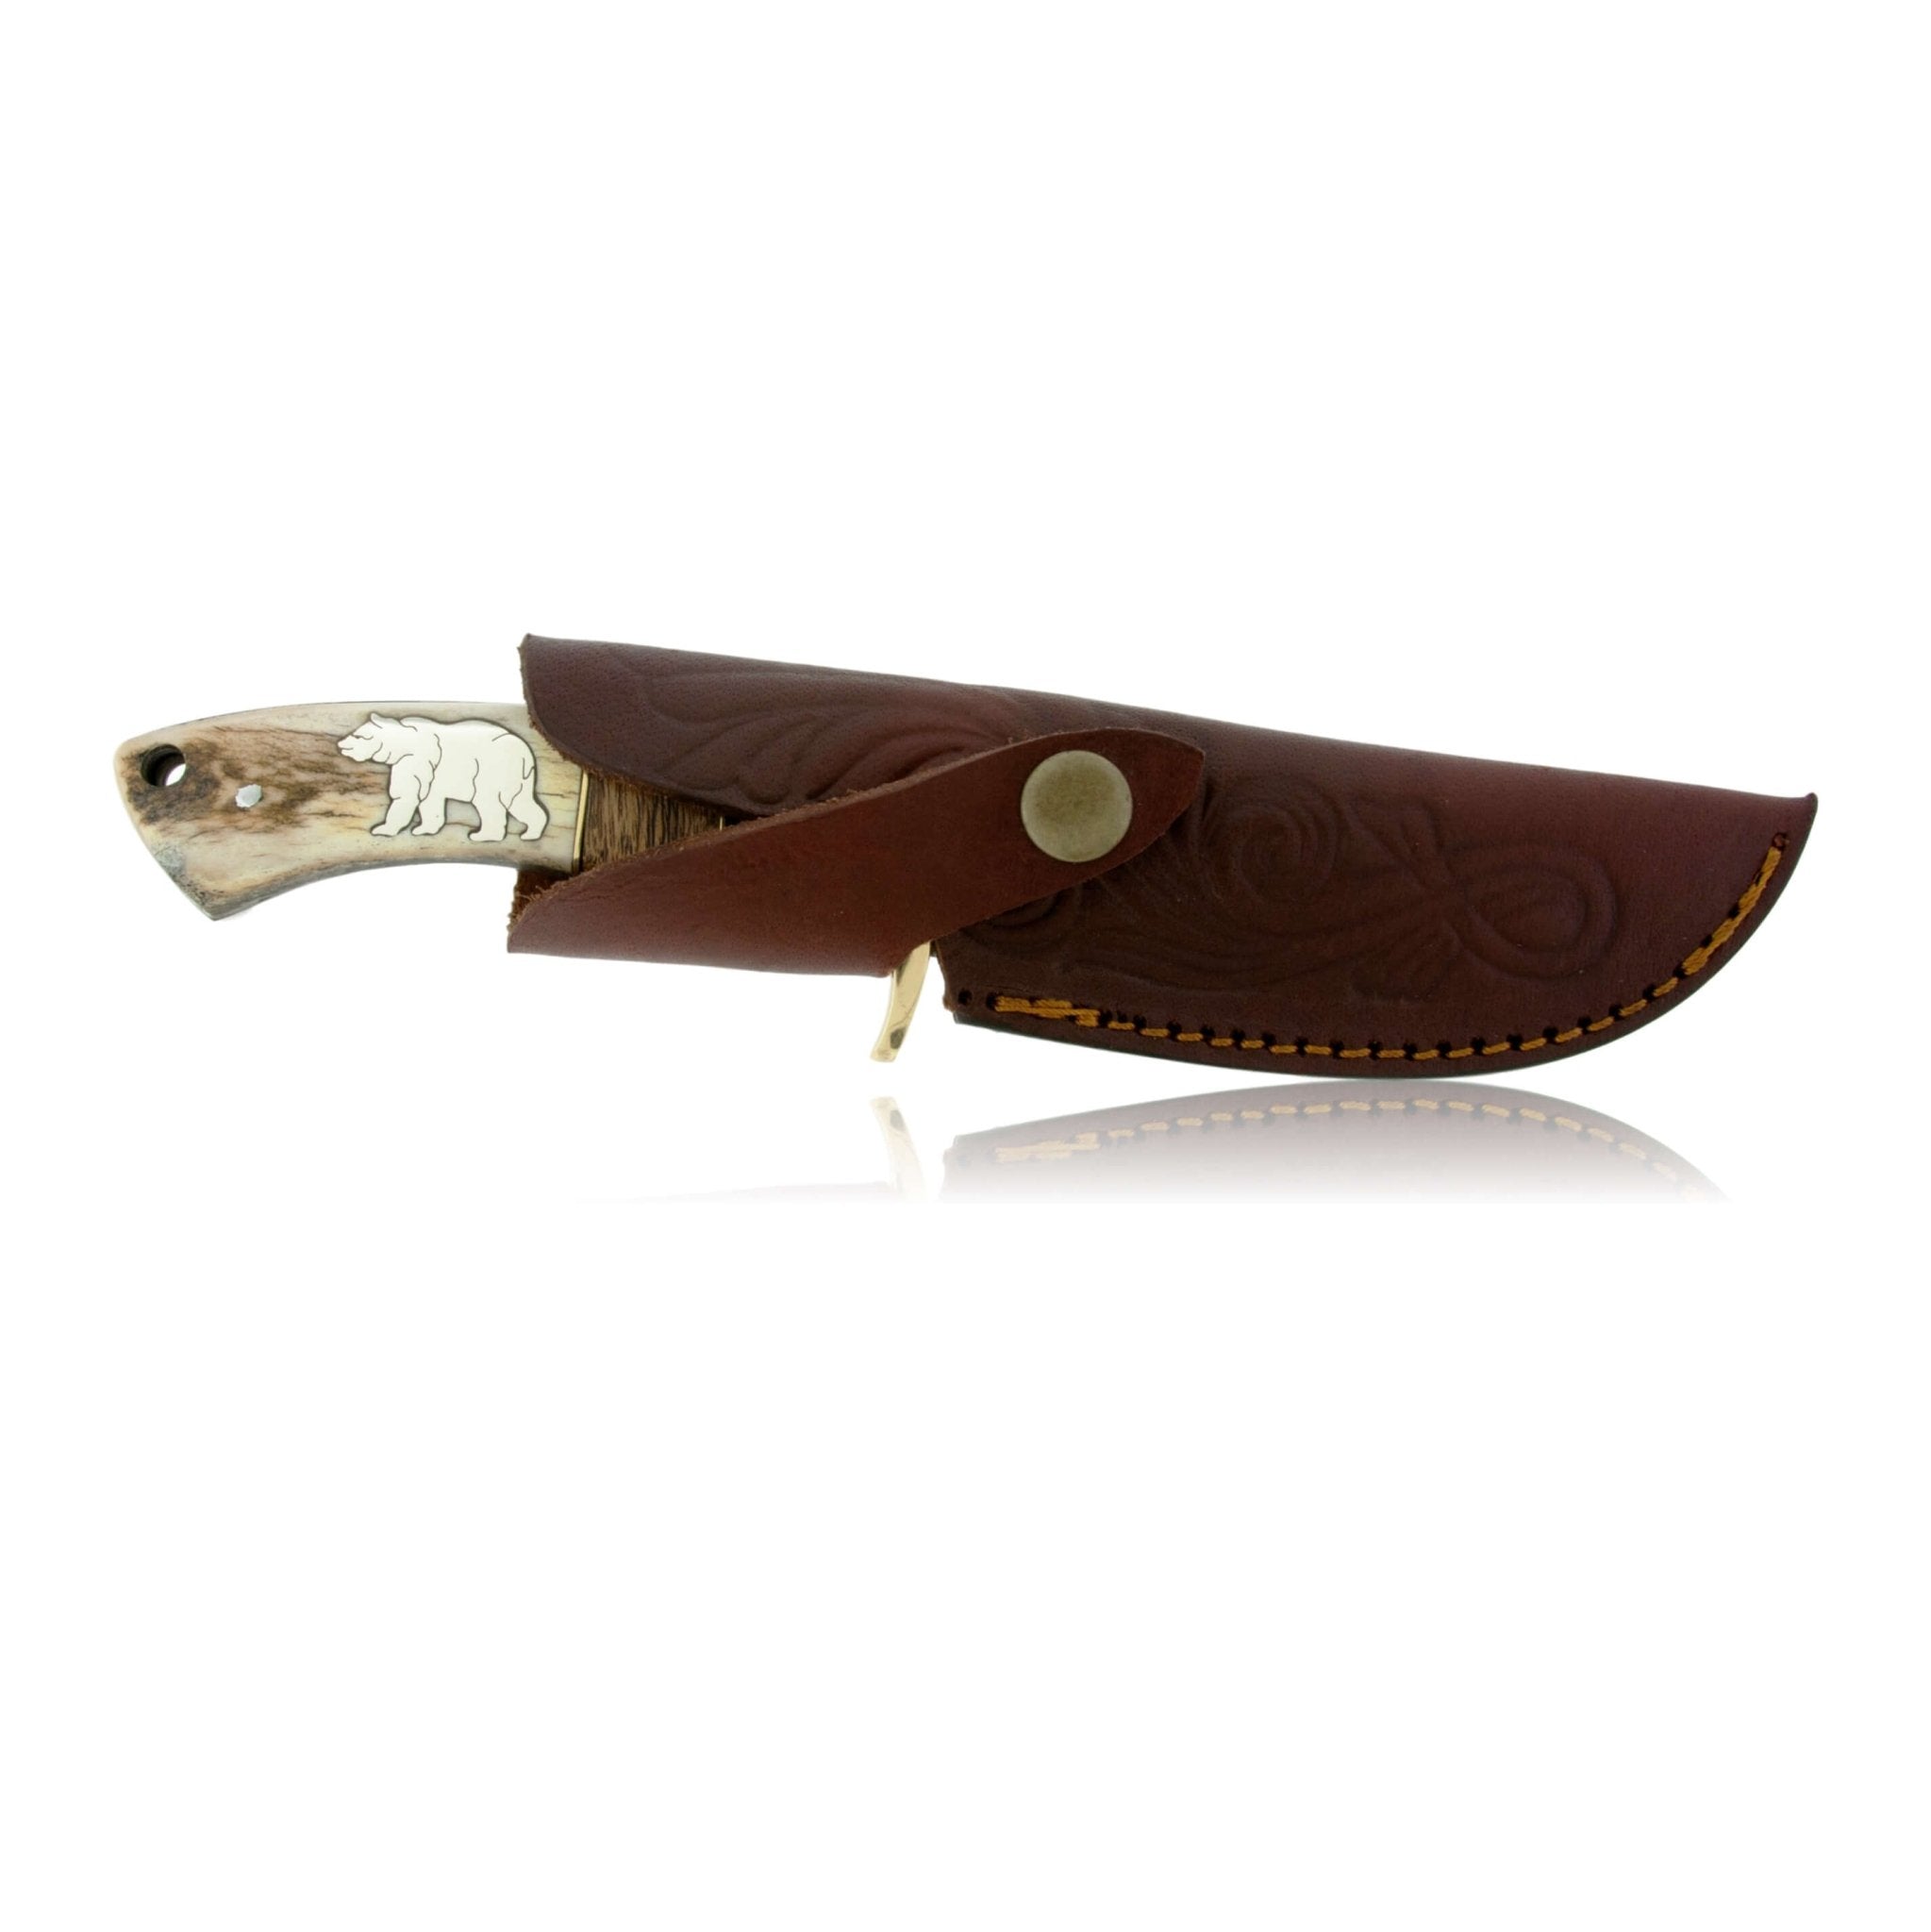 https://parkcityjewelers.com/cdn/shop/products/large-damascus-hunting-knife-with-antler-sterling-silver-bear-inlay-294550.jpg?v=1683321937&width=2400